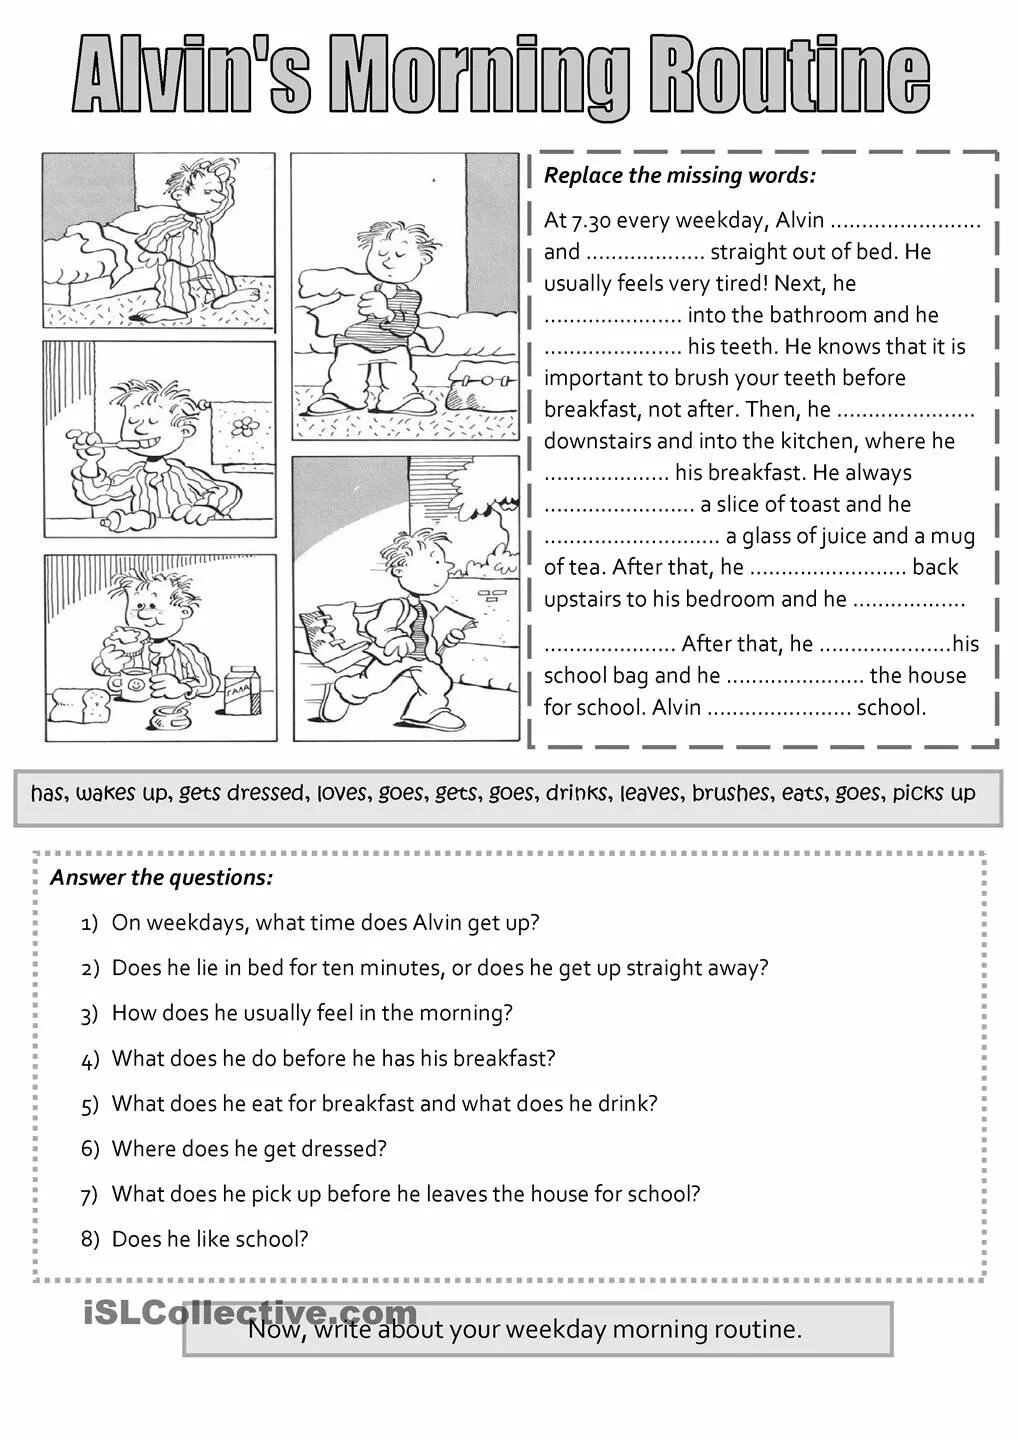 Present simple routine. Daily Routine задания. Present simple задание для детей Worksheets. Задания Daily Routine for Kids. Чтение present simple.